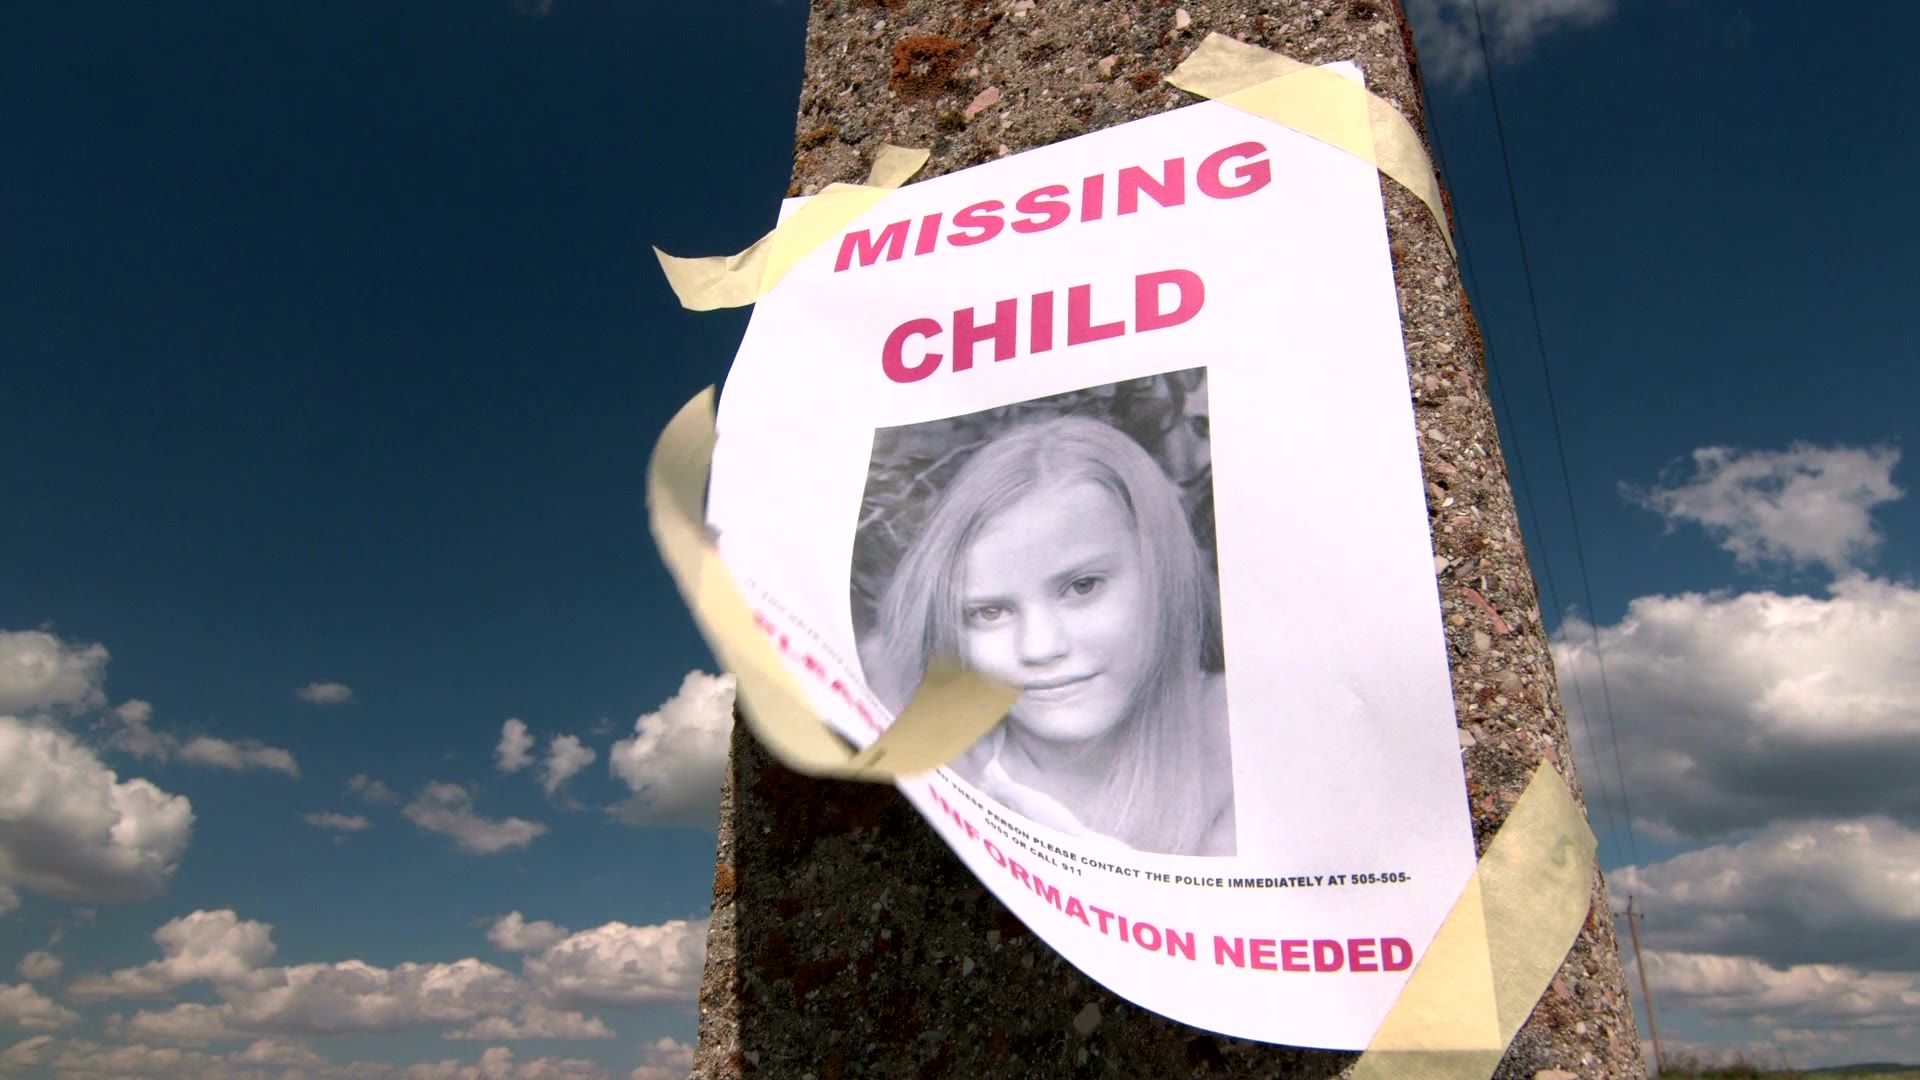 Tips On How To Report A Missing Child